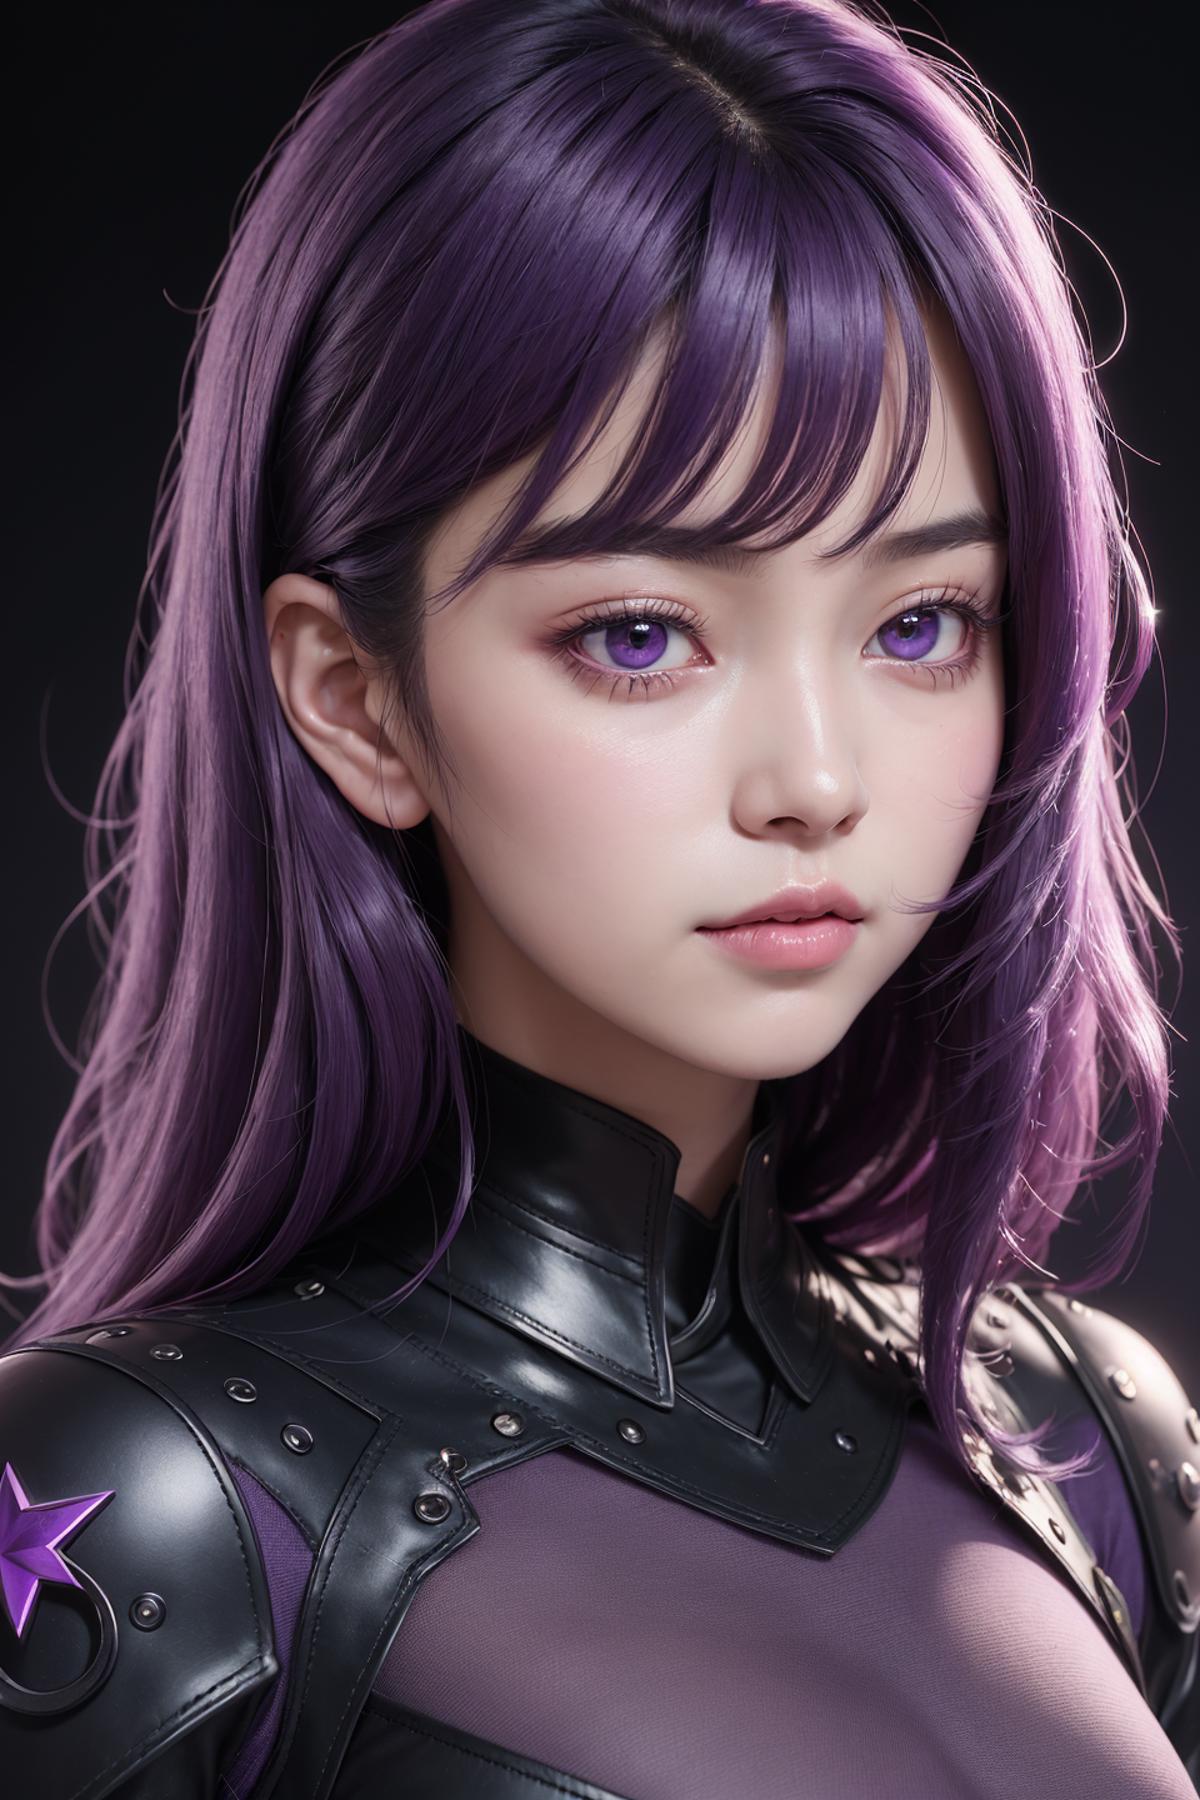 A purple haired girl with purple eyes is wearing a black shirt.